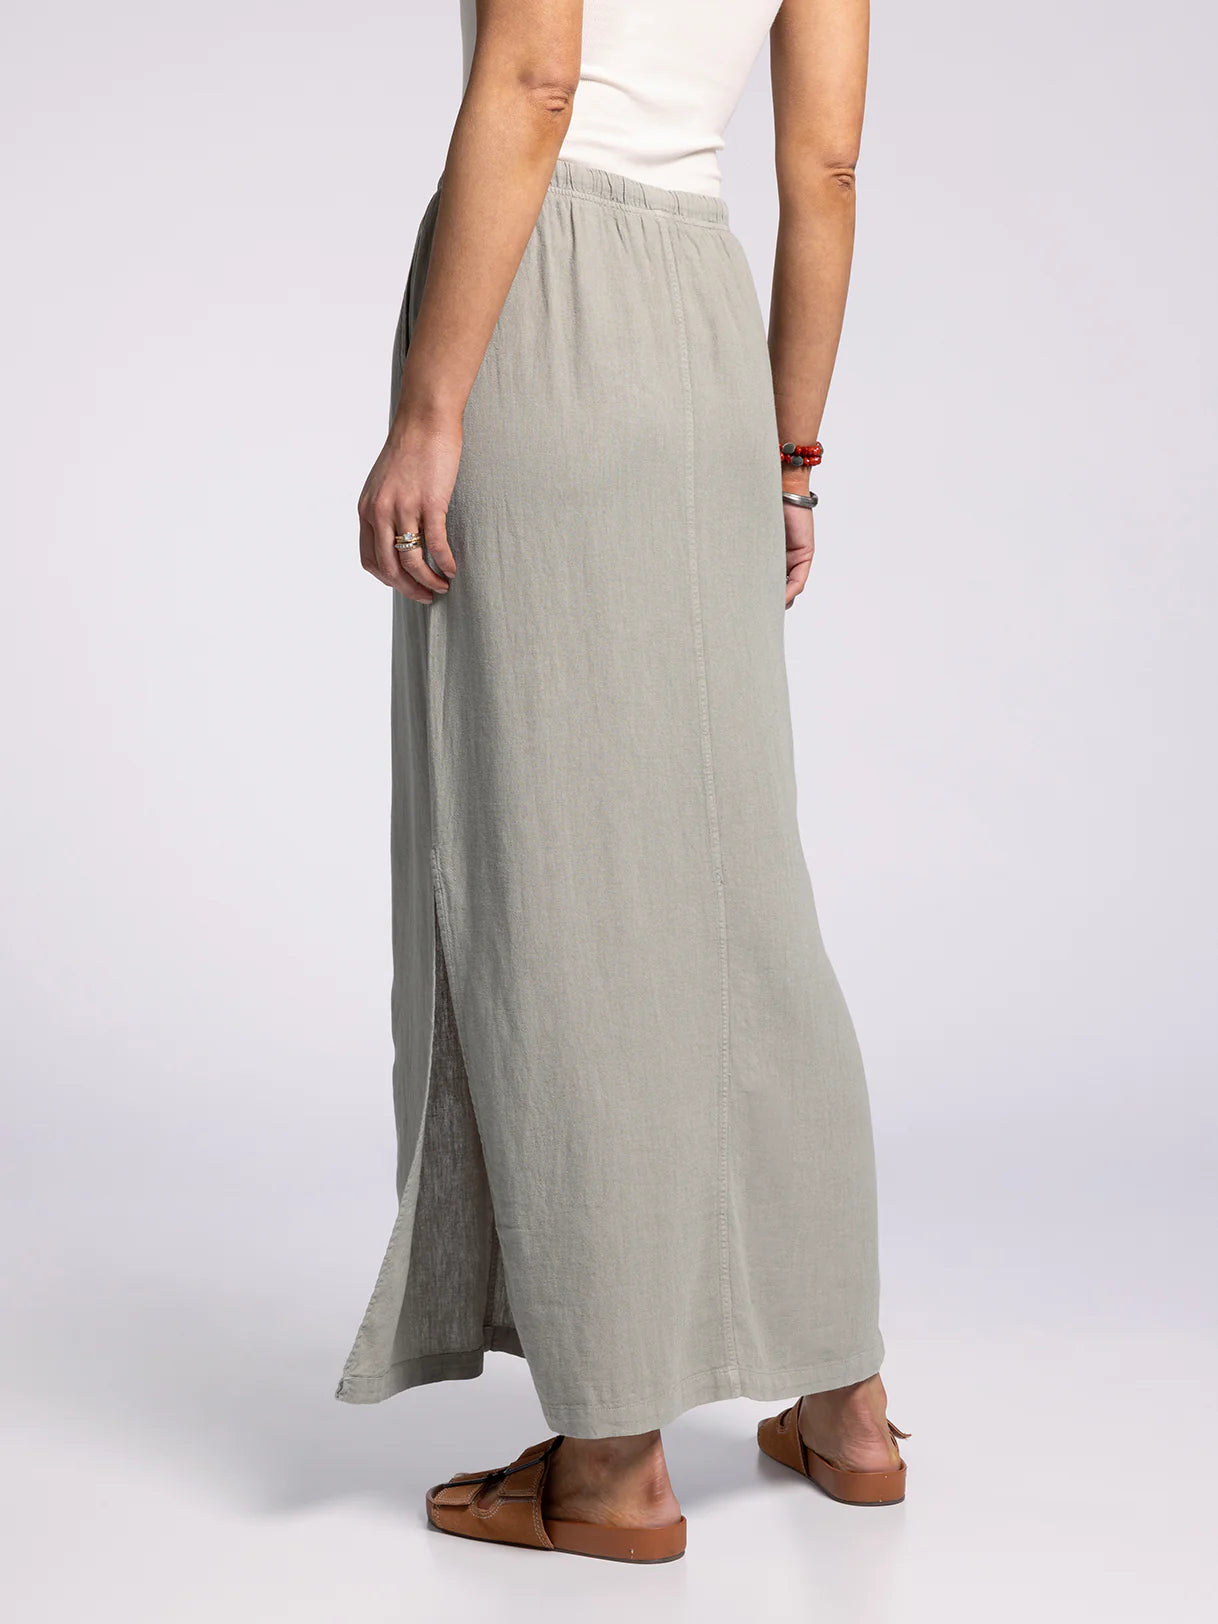 The Alcove Skirt